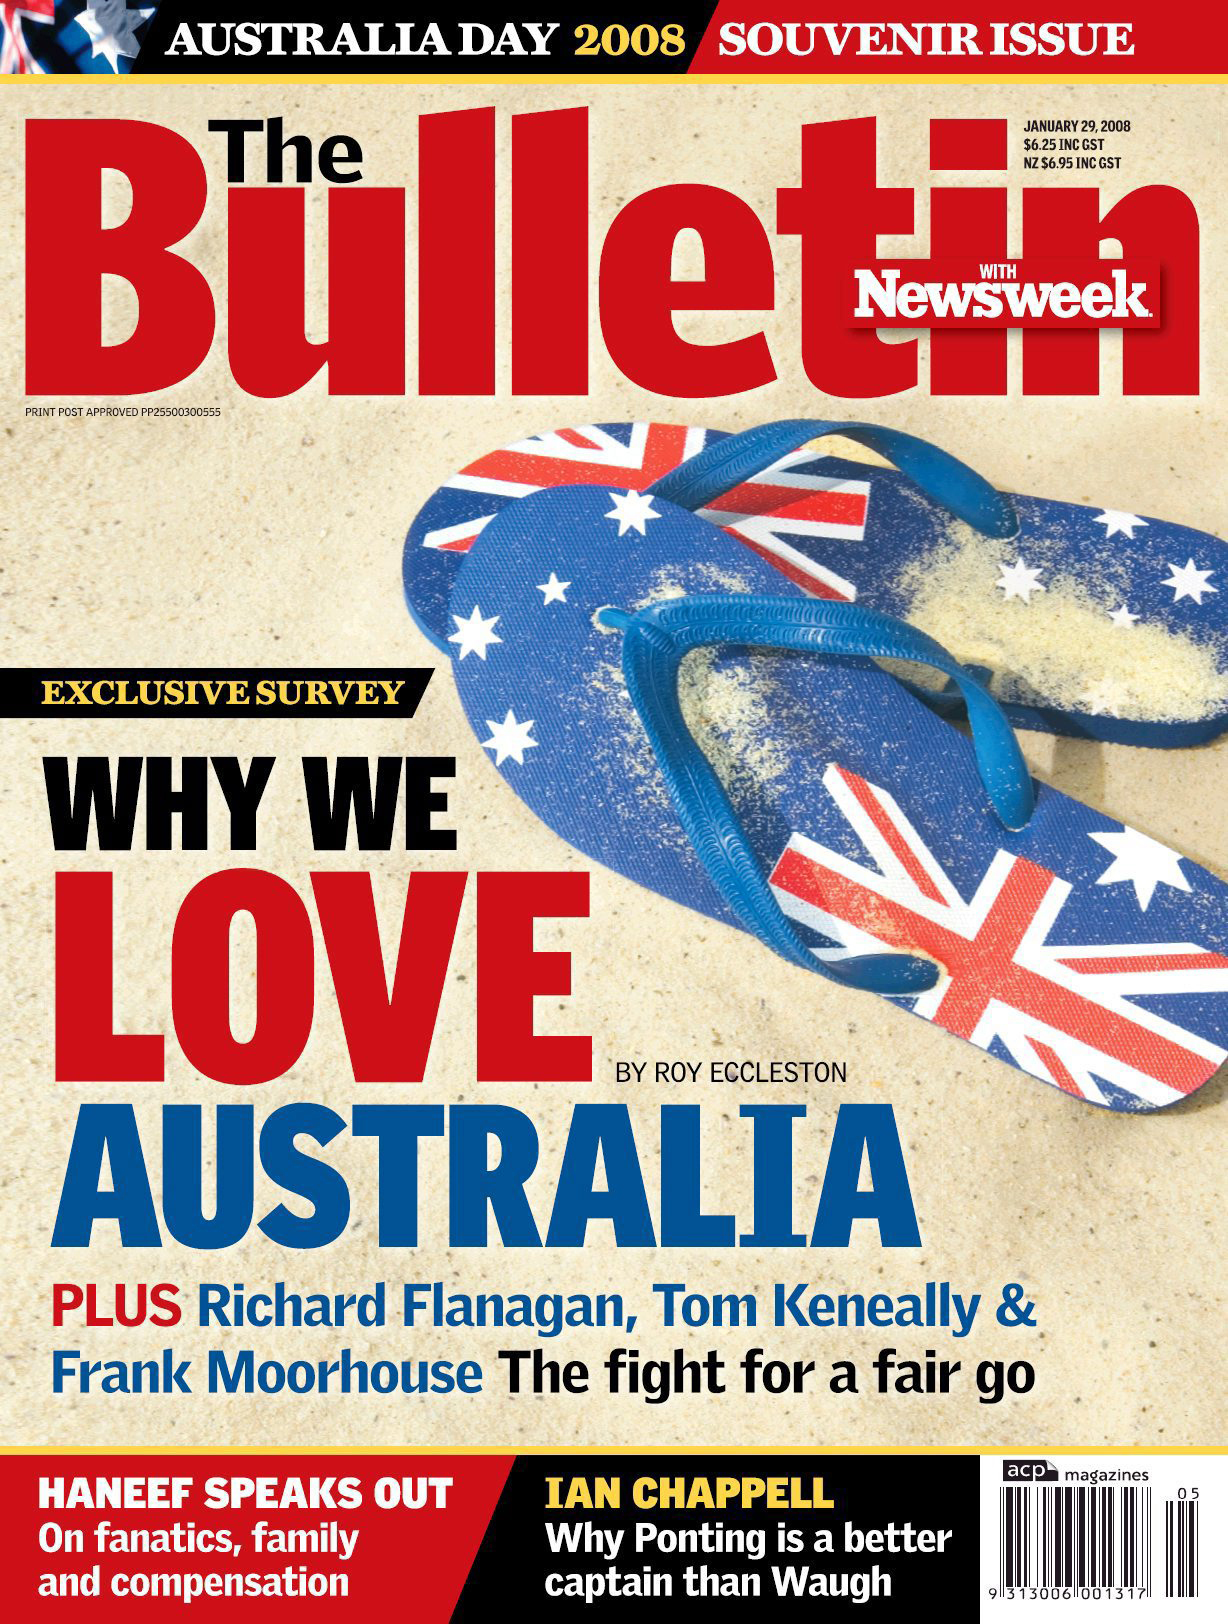 The Bulletin’s final cover, 29 January 2008.